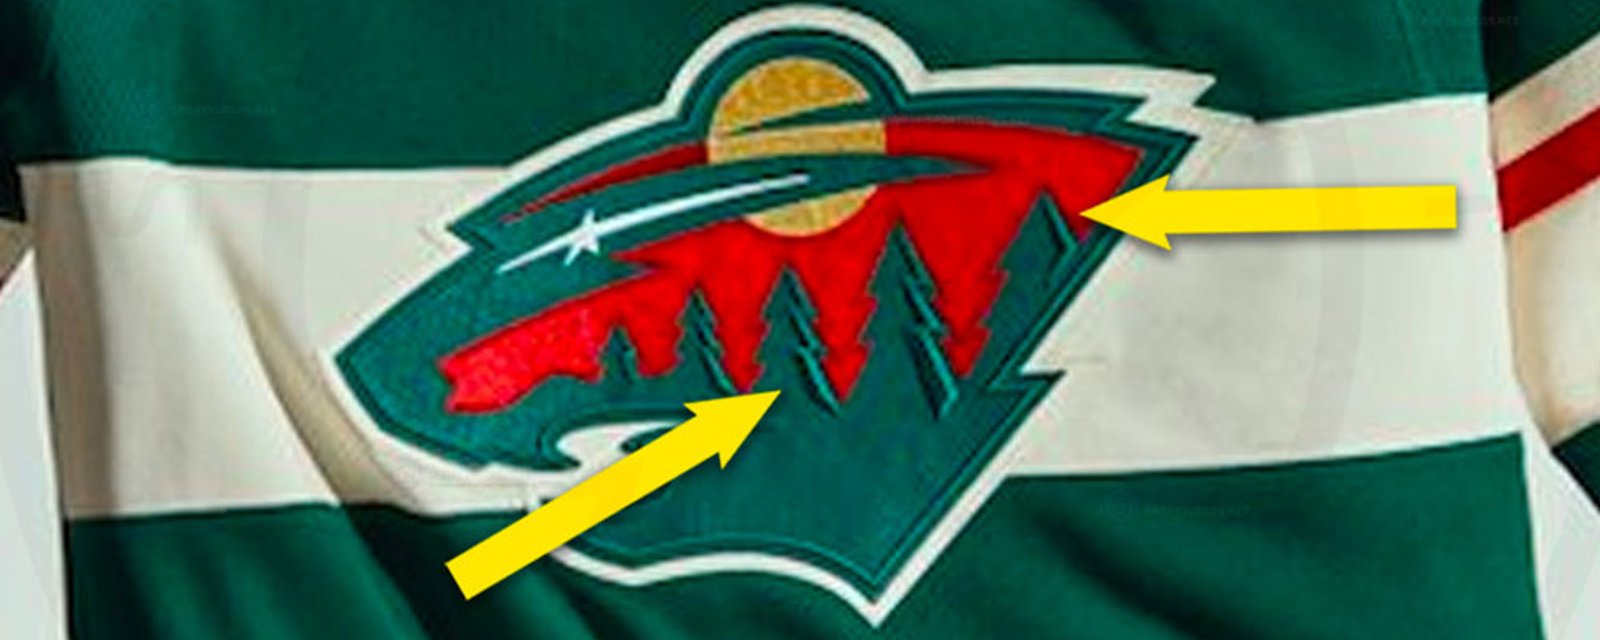 All NHL team switch to Primegreen jerseys with new dimensional embroidery on crests